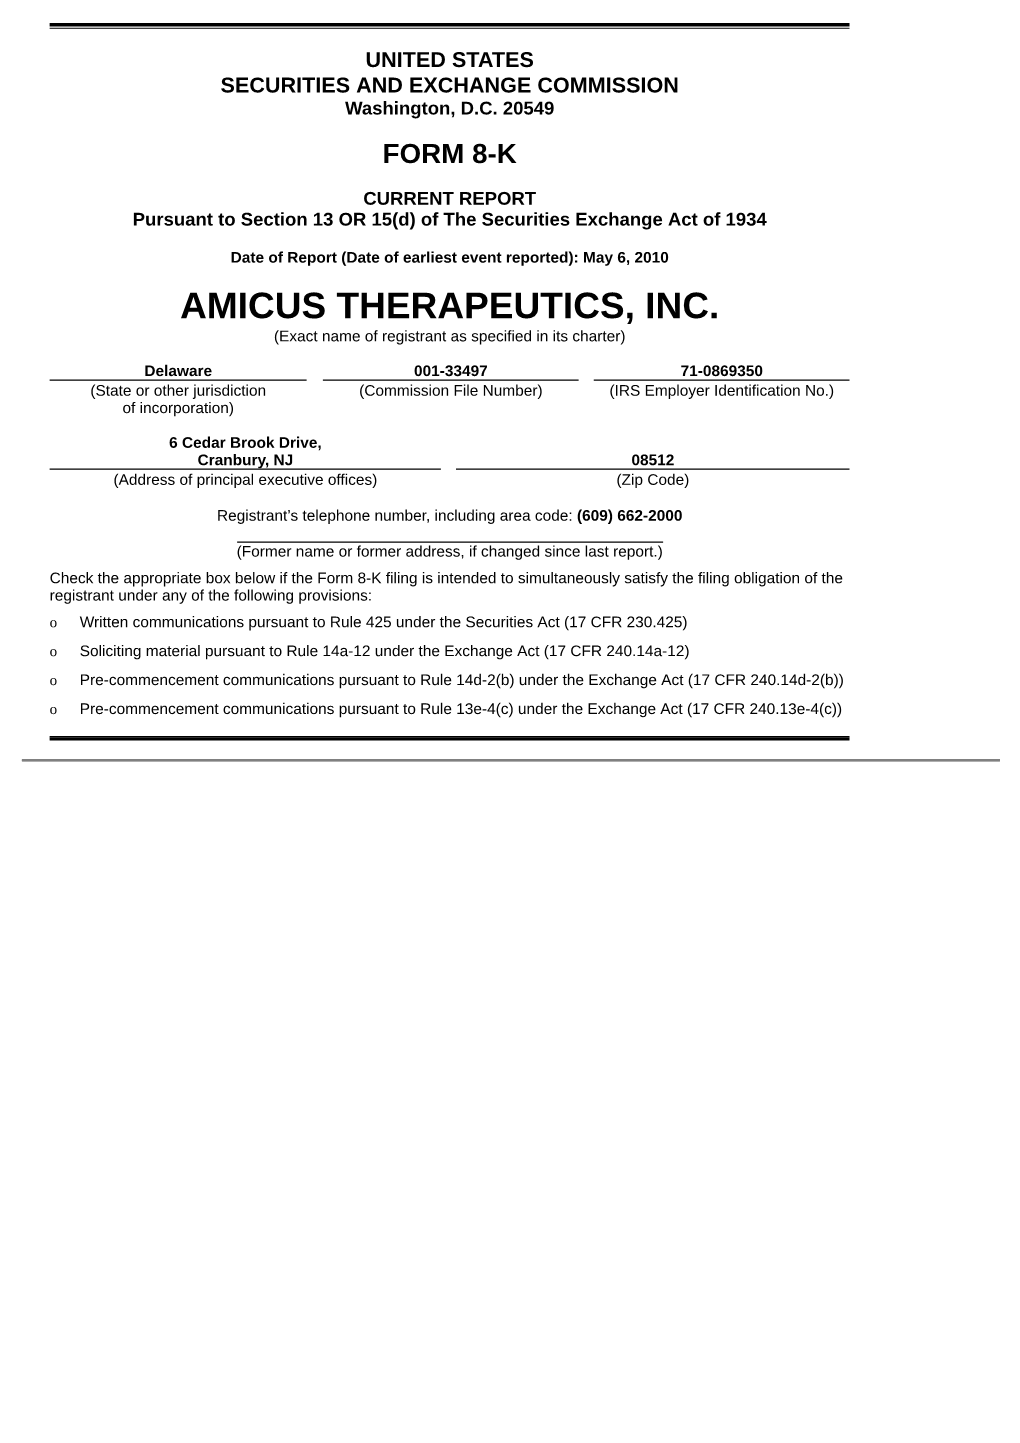 AMICUS THERAPEUTICS, INC. (Exact Name of Registrant As Specified in Its Charter)